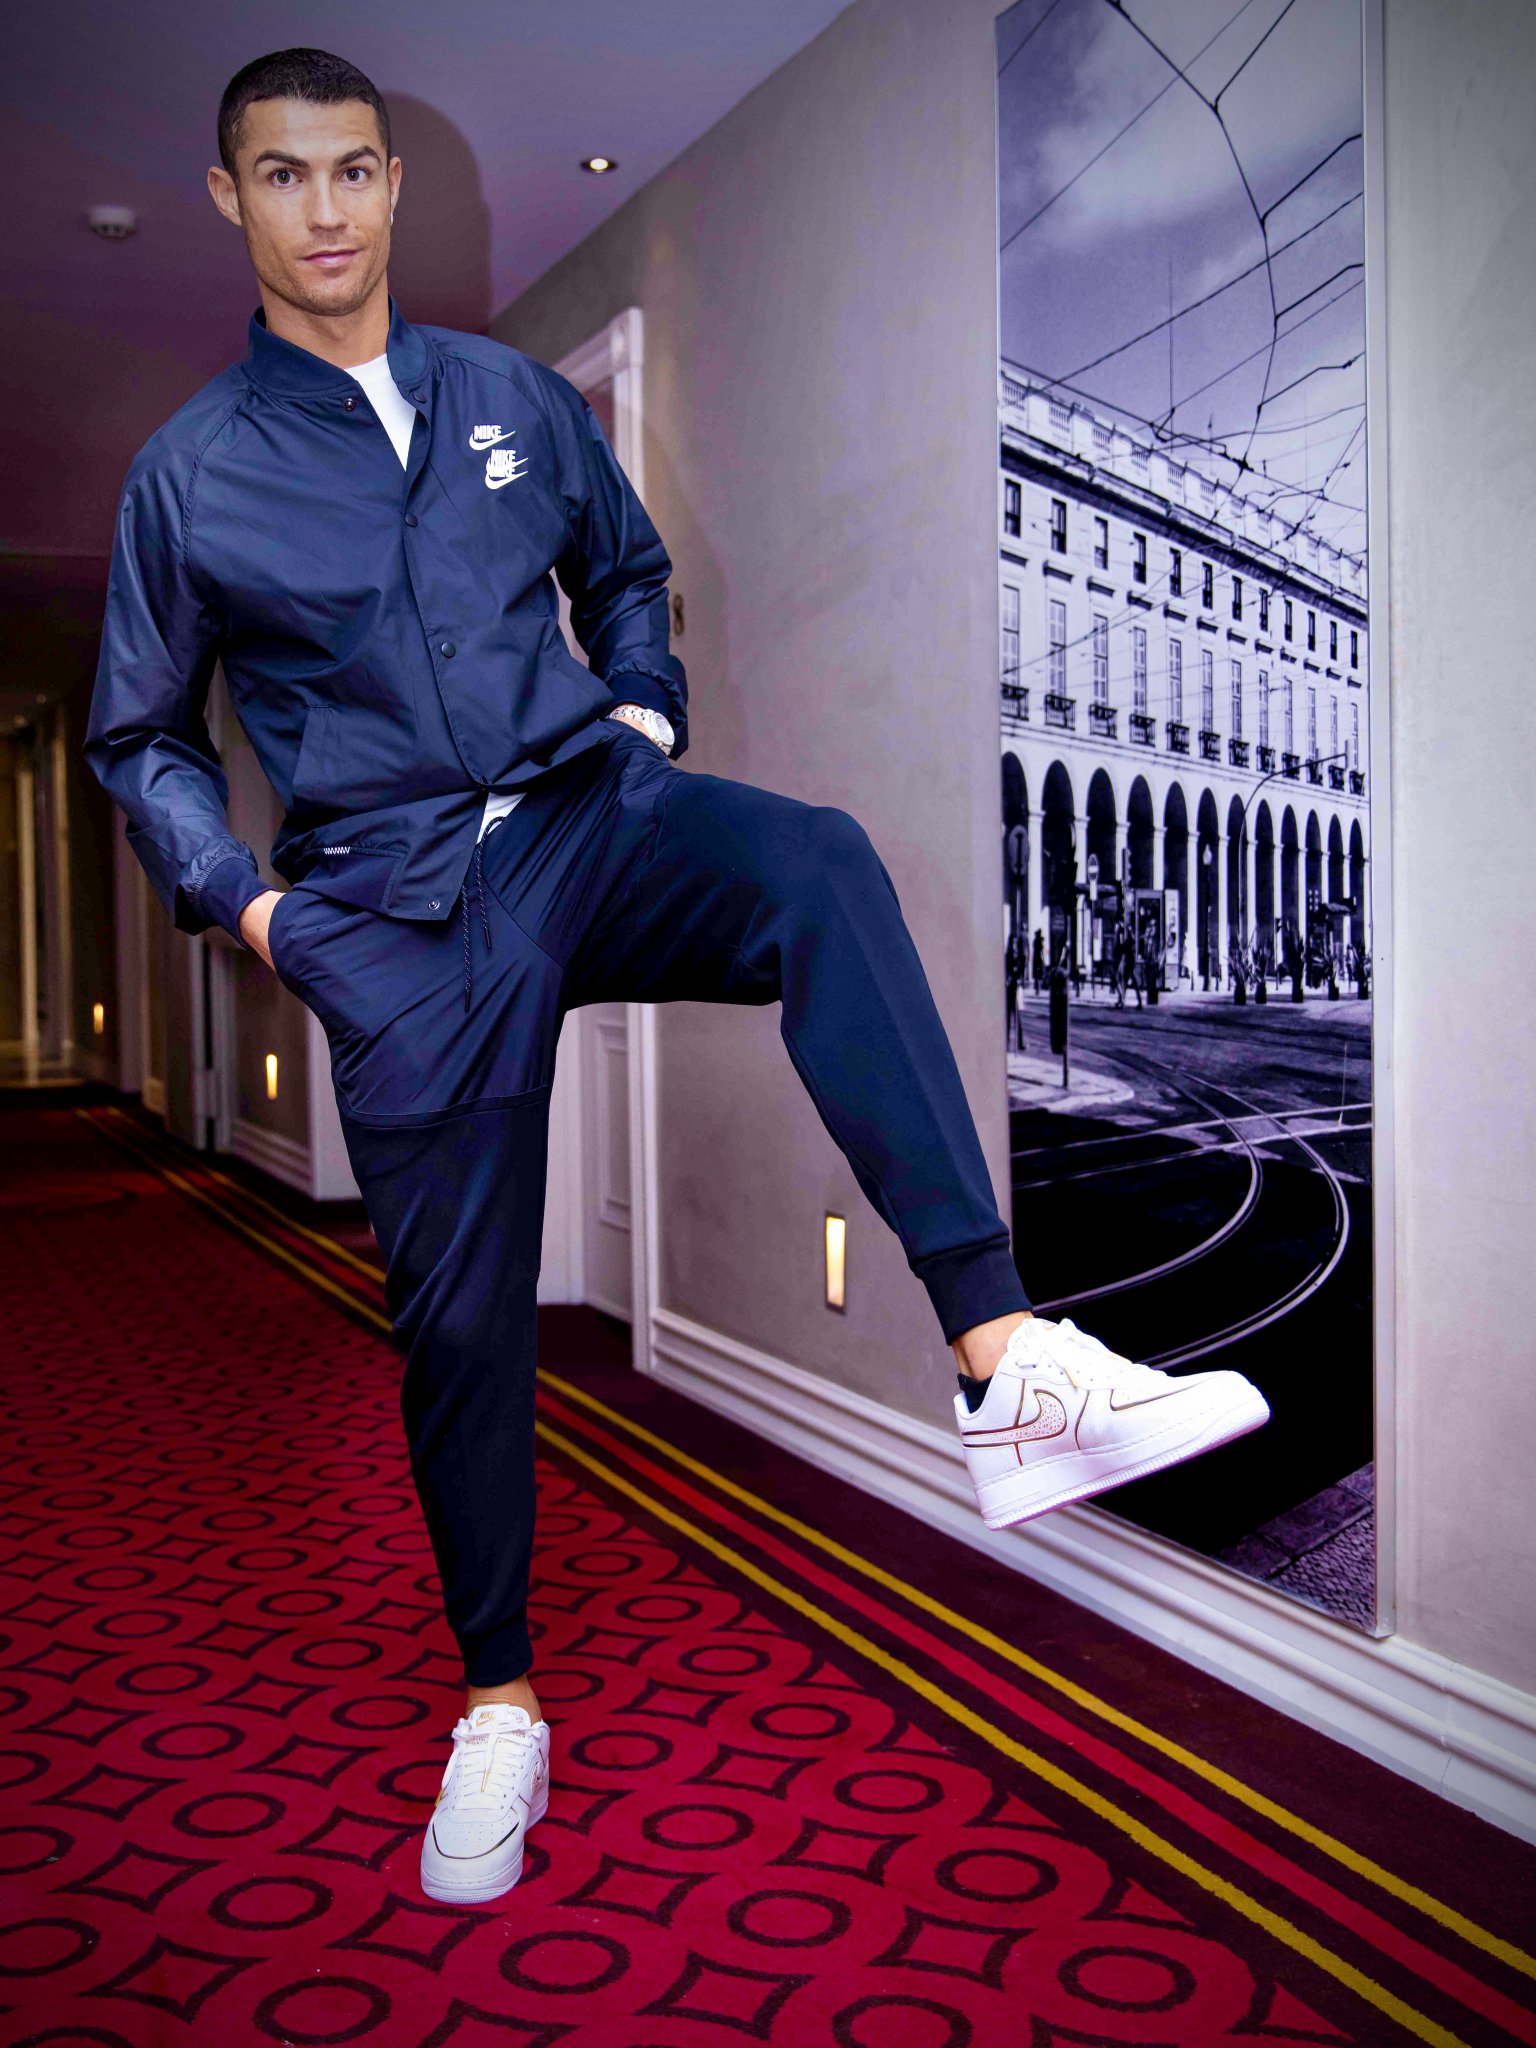 Cristiano Ronaldo on X: Did you grab a pair?! Can't wait to see